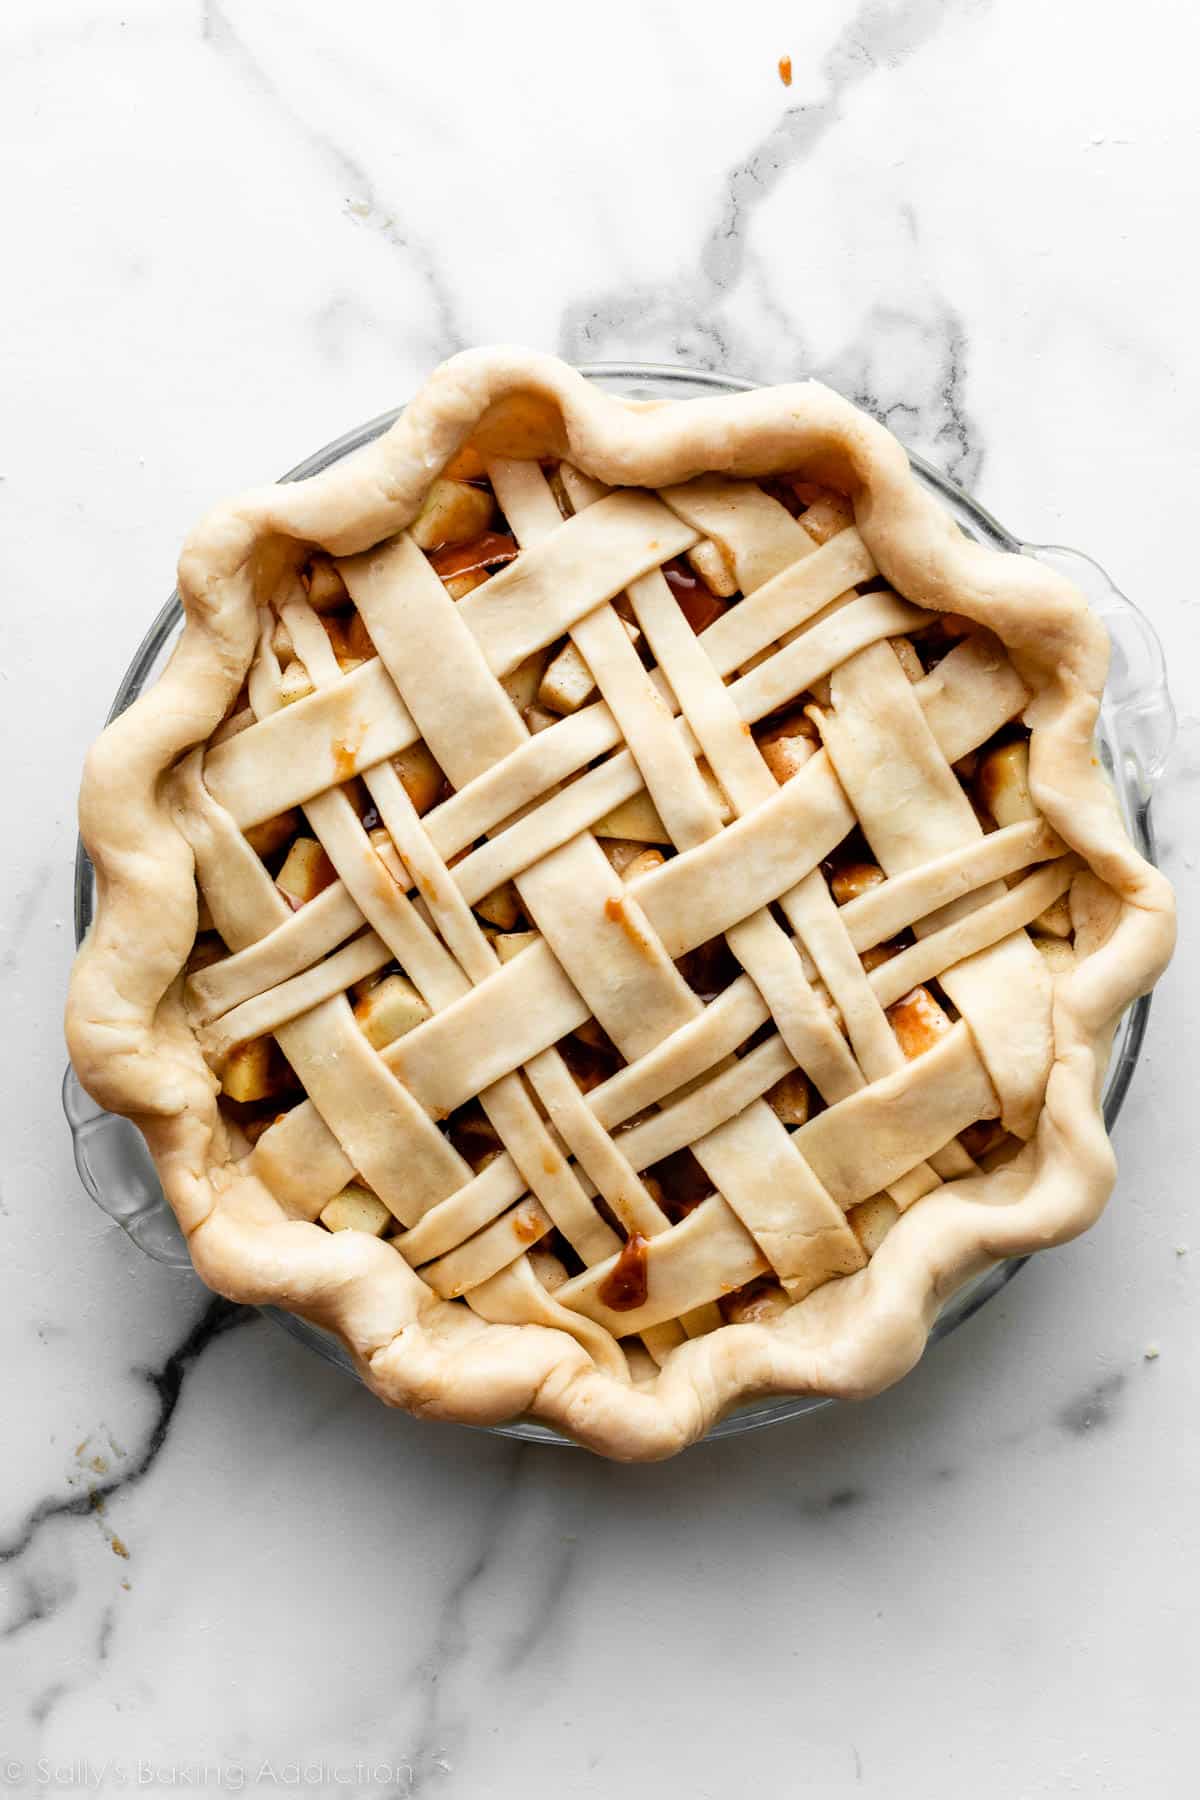 unbaked pie with fluted edge and thick and thin lattice design.